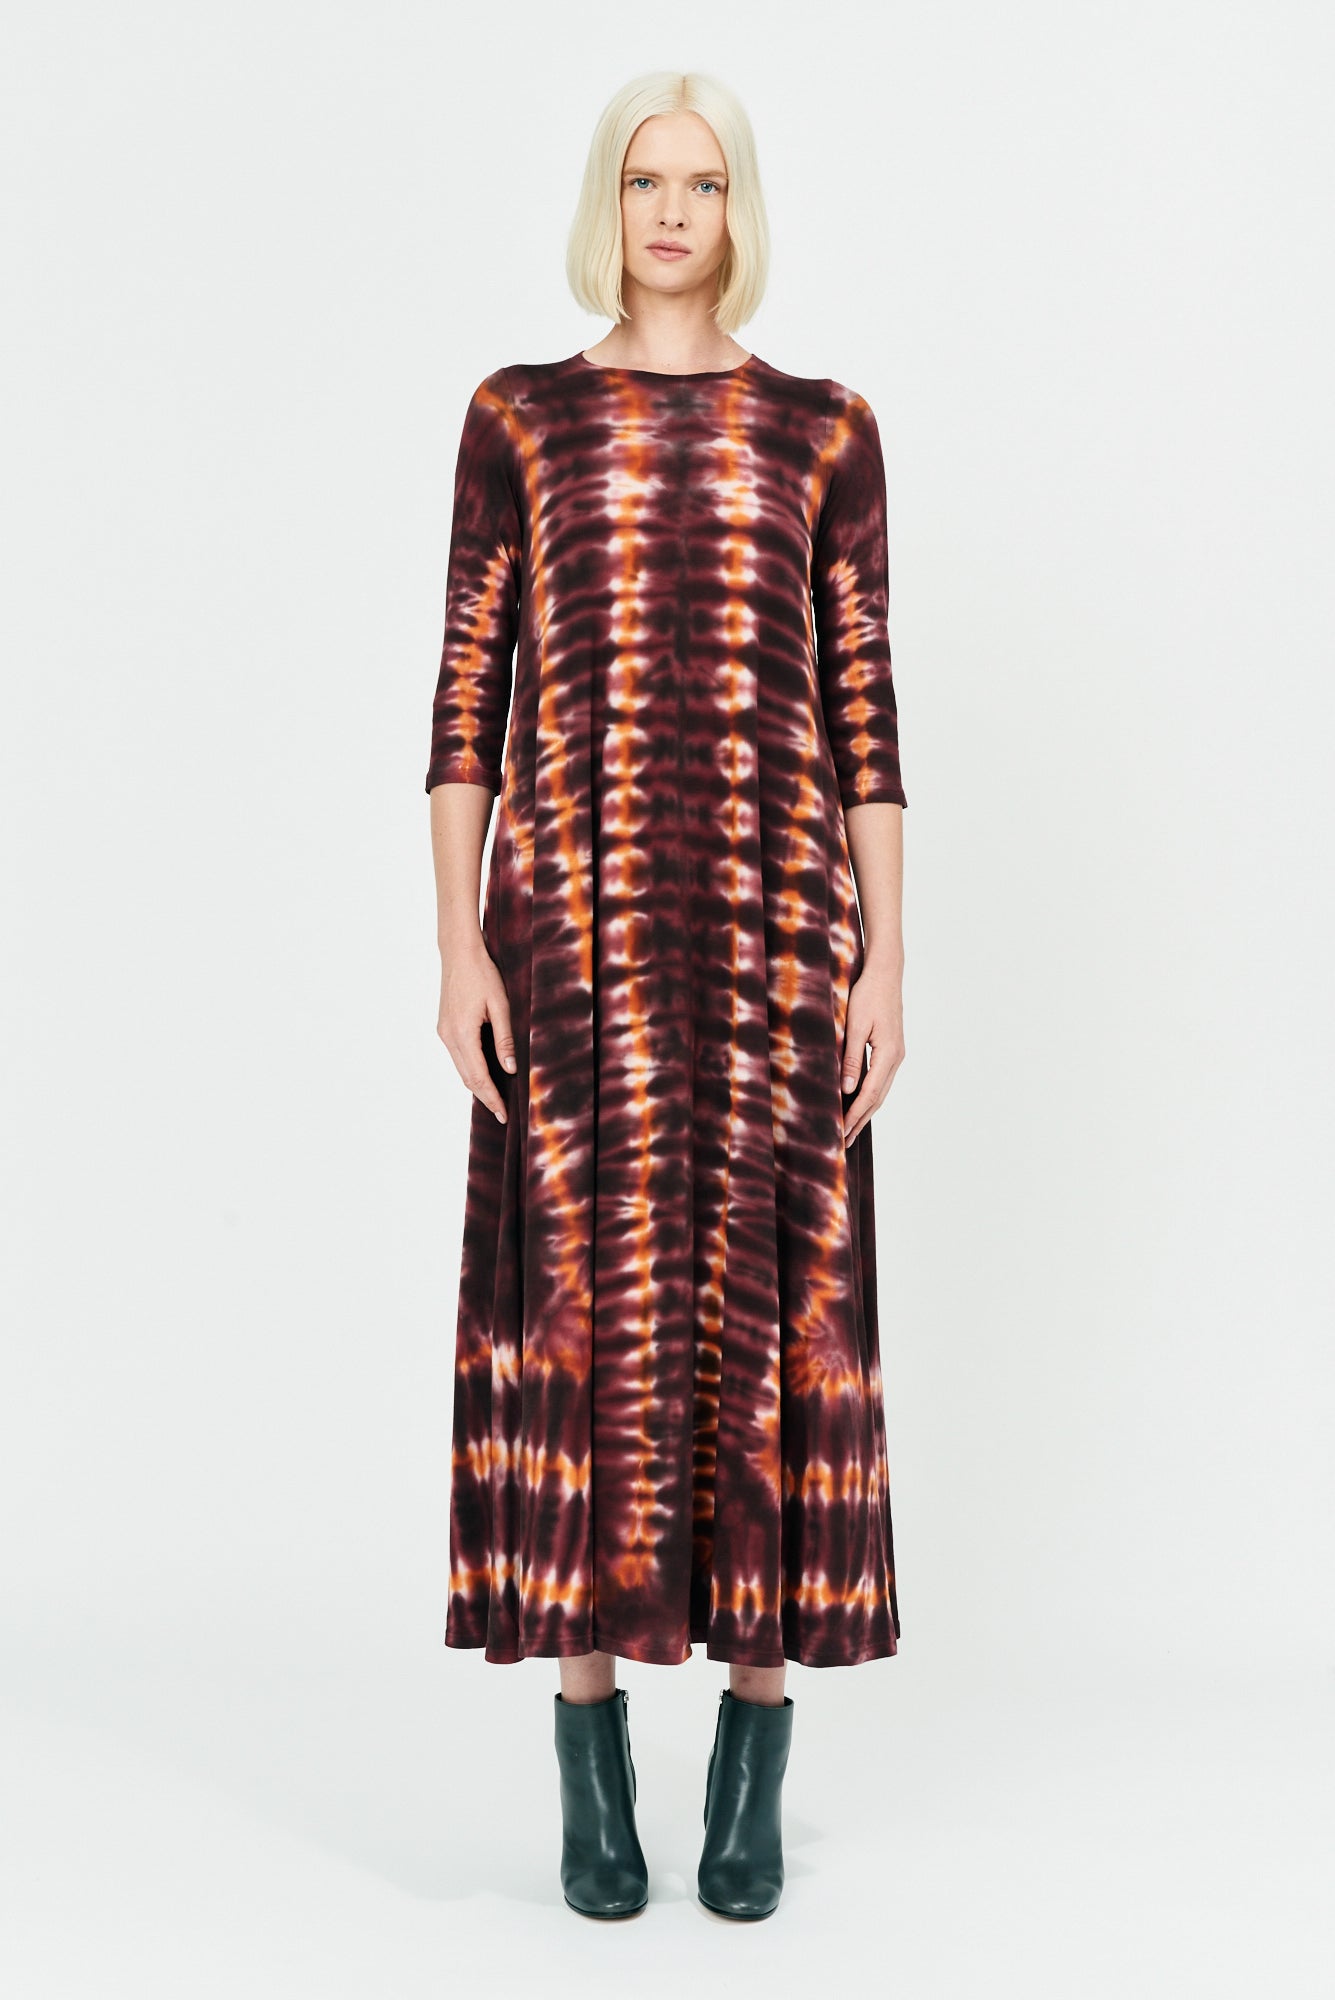 Red Hills Tie Dye Classic Jersey Drama Maxi Dress Full Front View